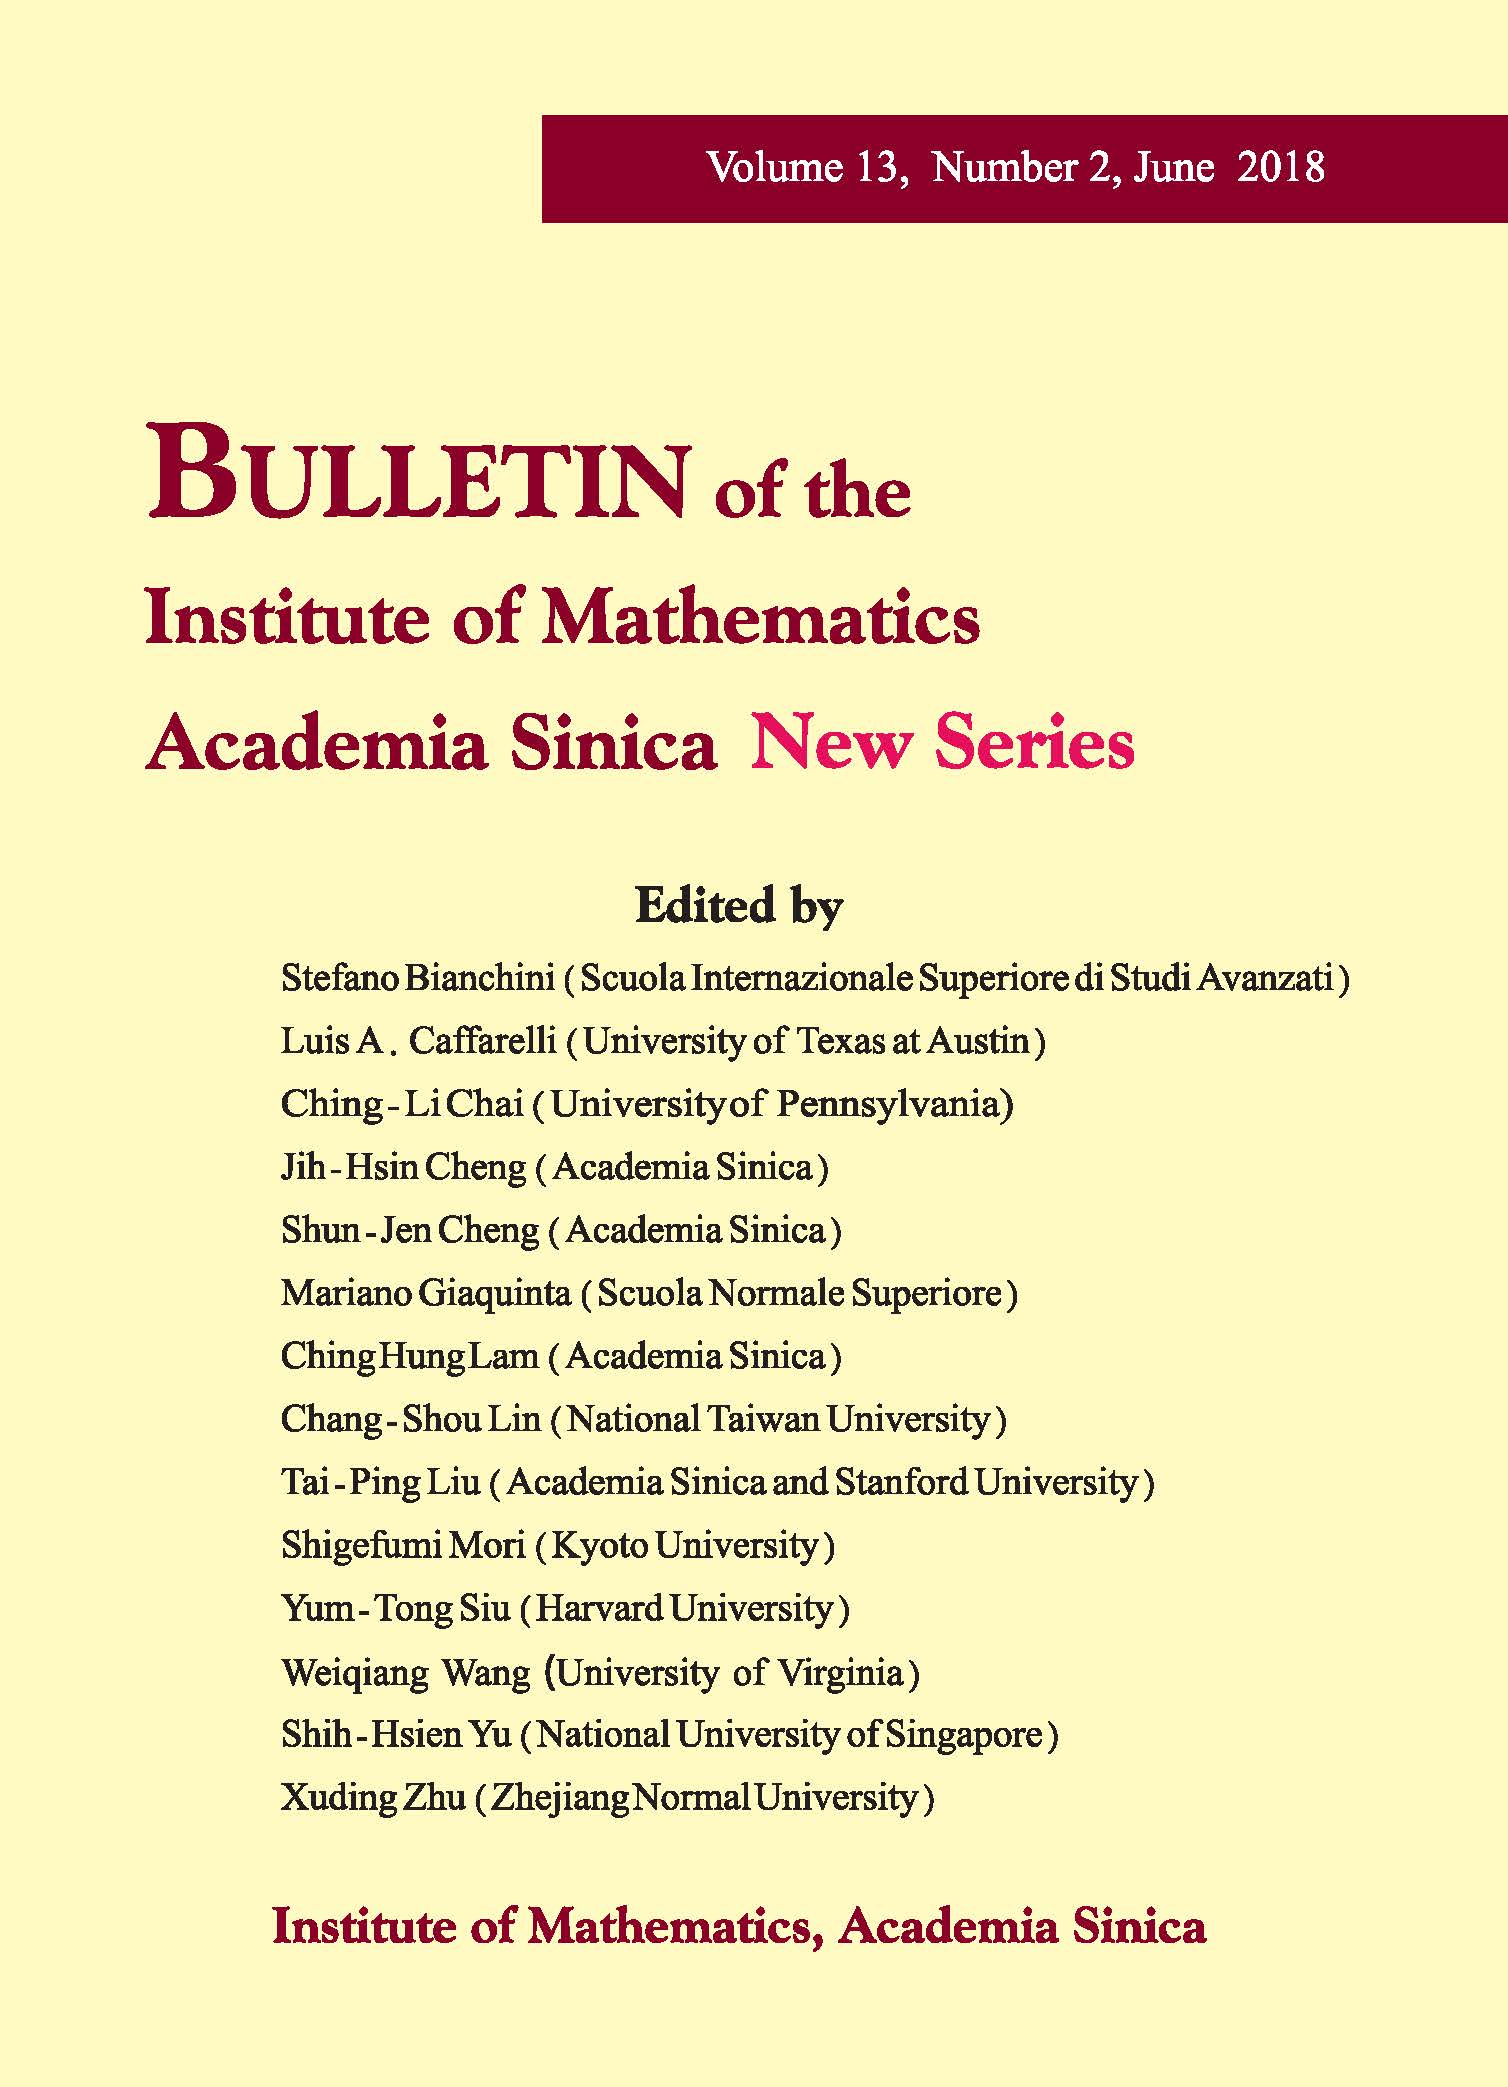 Bulletin of the Institute of Mathematics Academia Sinica New Series, Vol. 13, No. 2 is now available.